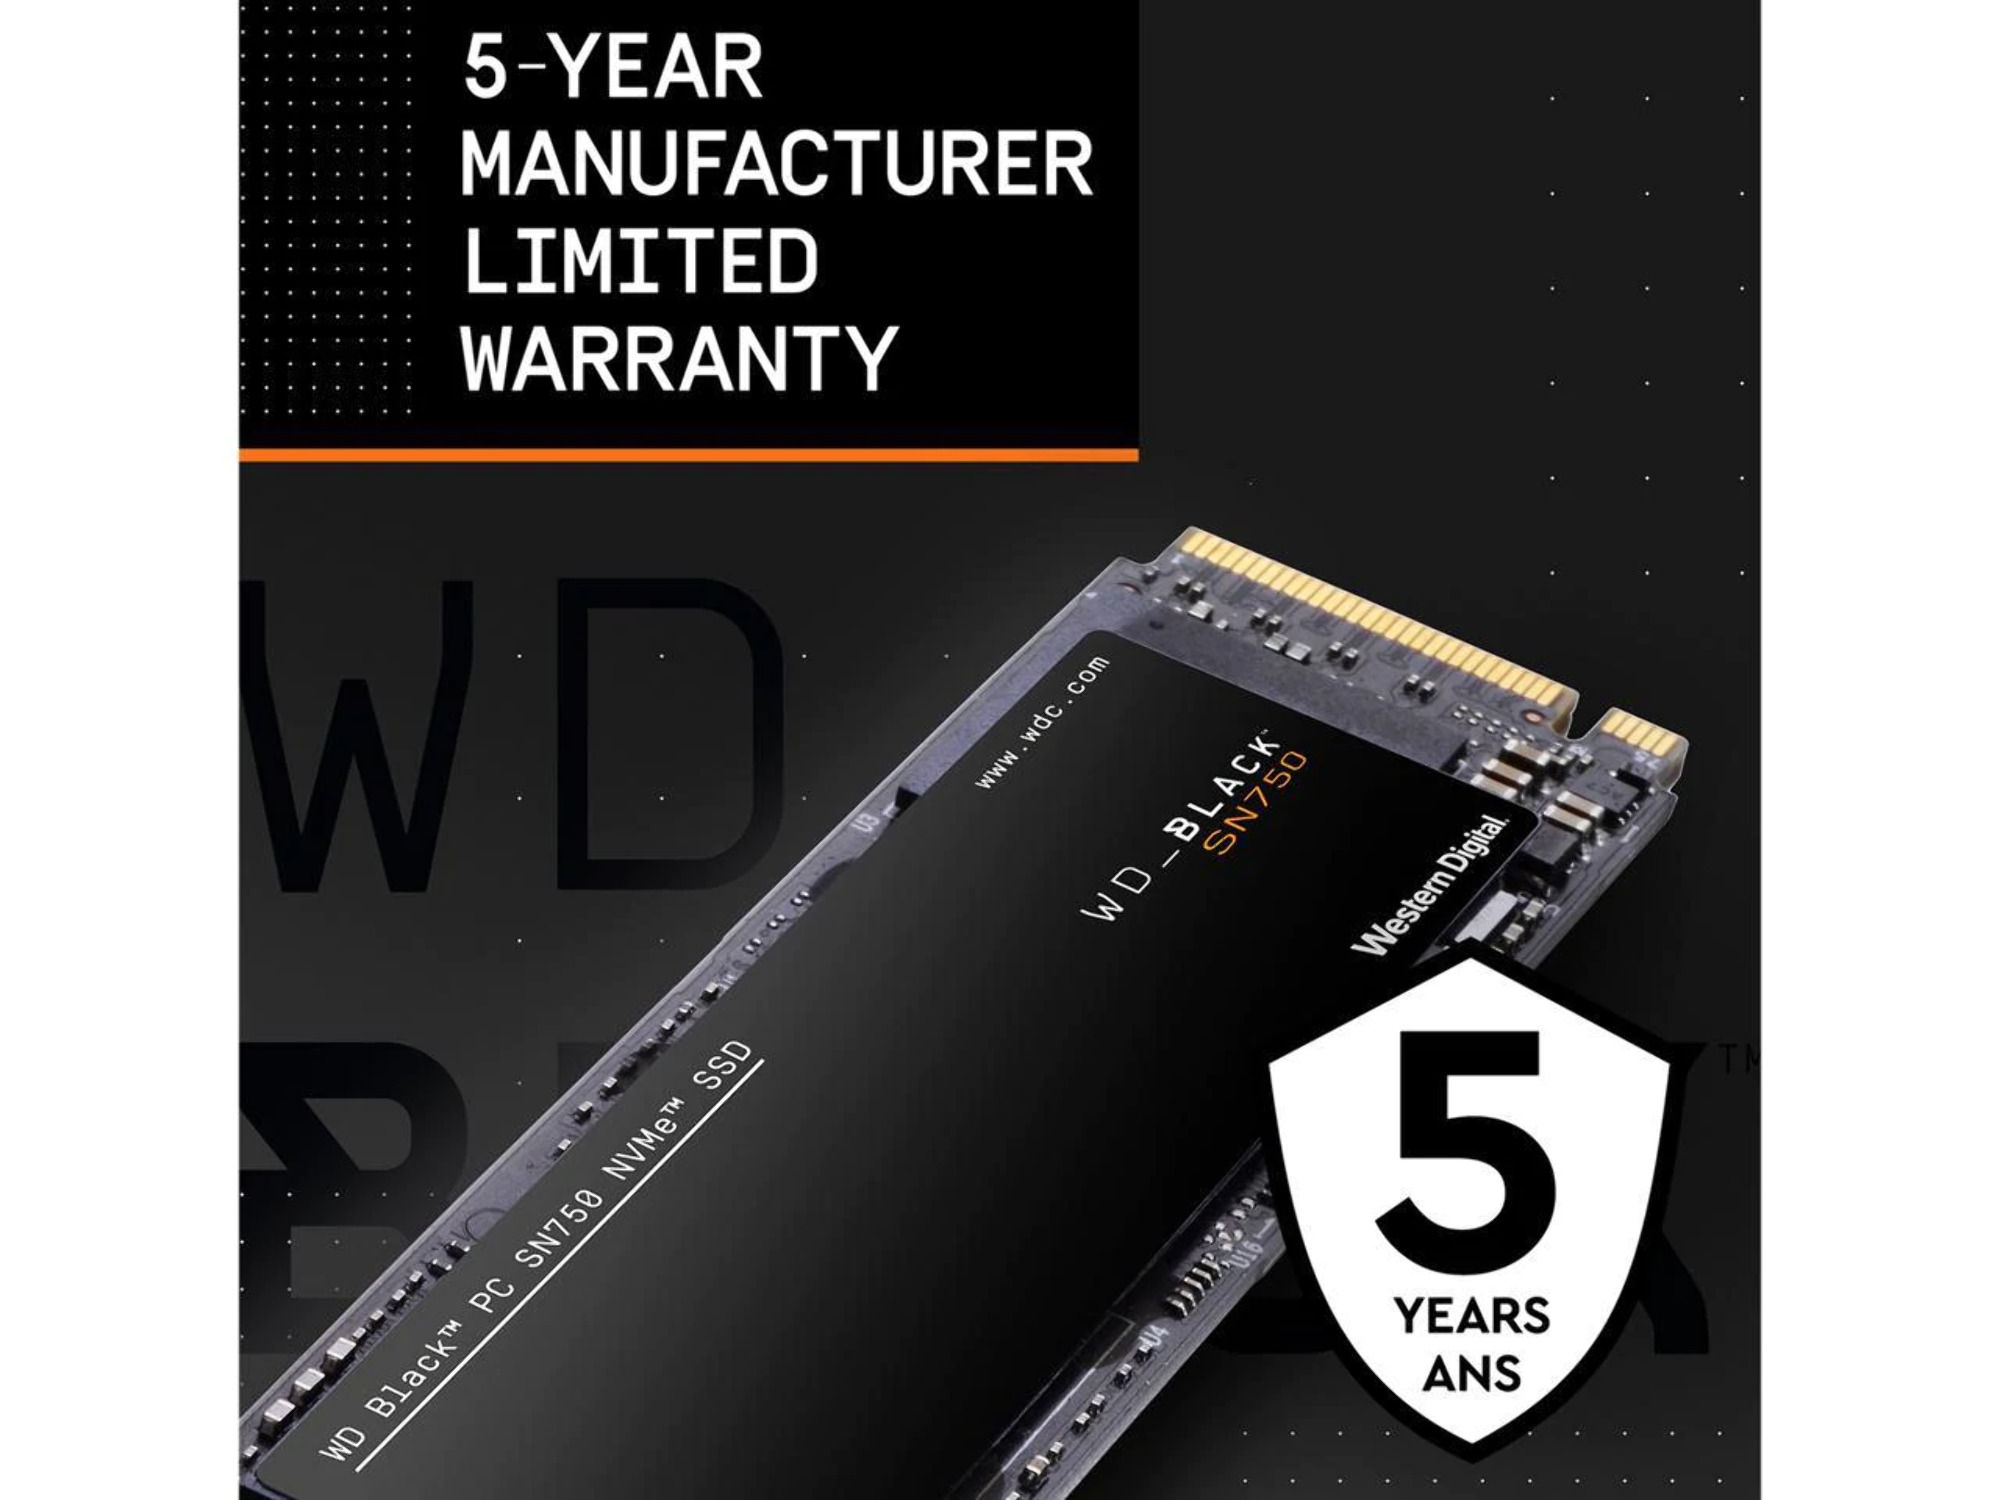 WD Black SN750 NVMe SSD WDS100T3X0C - Solid state drive - 1 TB - internal - M.2 2280 - PCI Express 3 - image 2 of 5